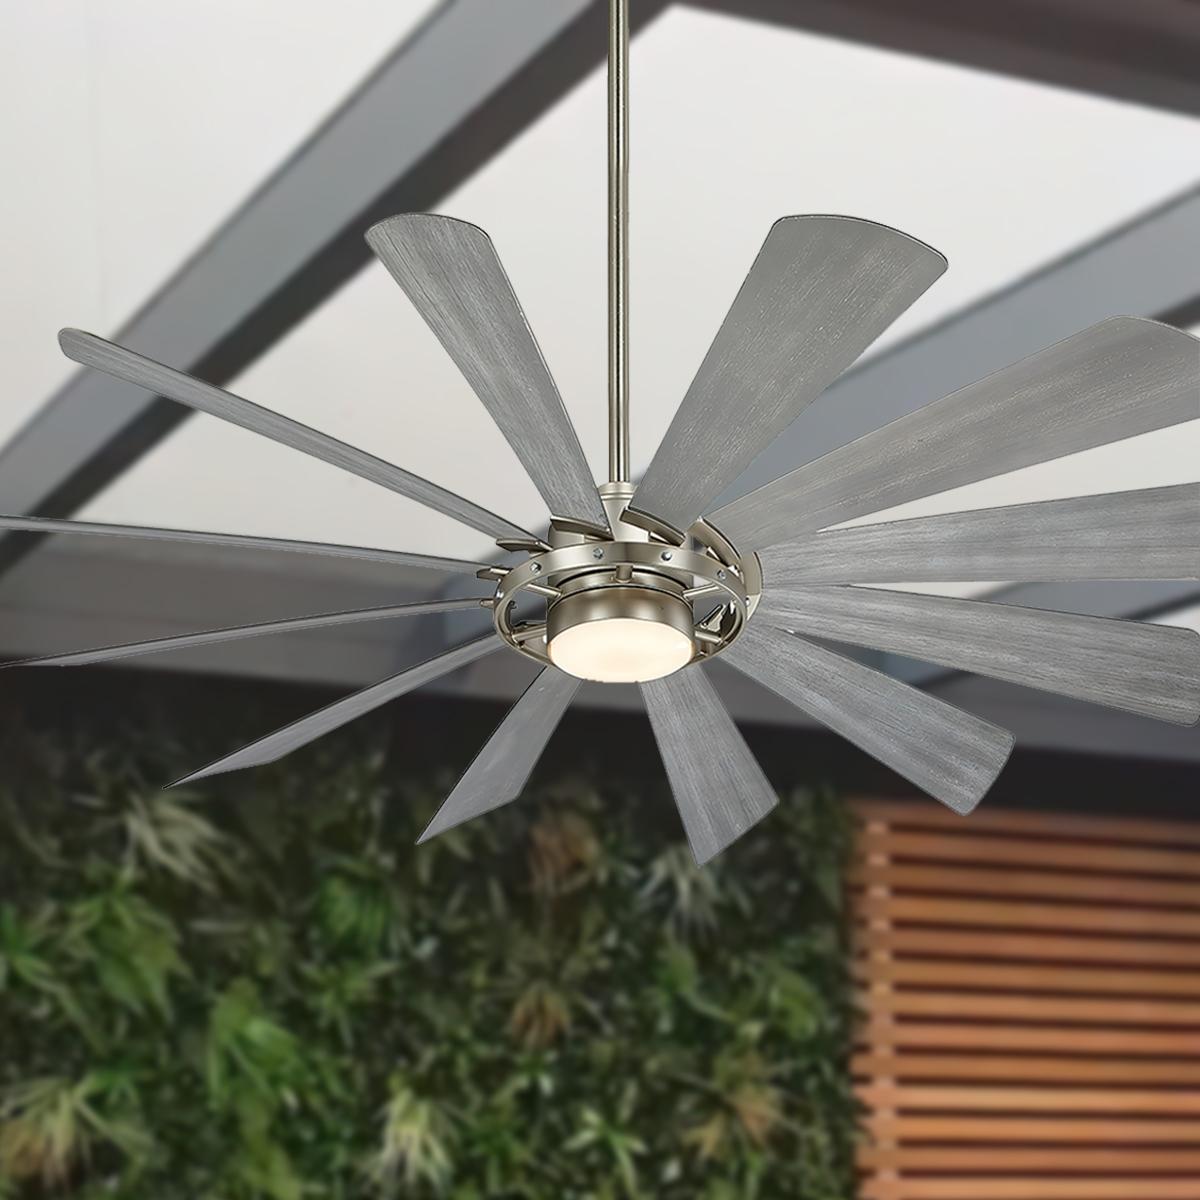 Windmolen 65 Inch Windmill Outdoor Smart Ceiling Fan With Light And Remote